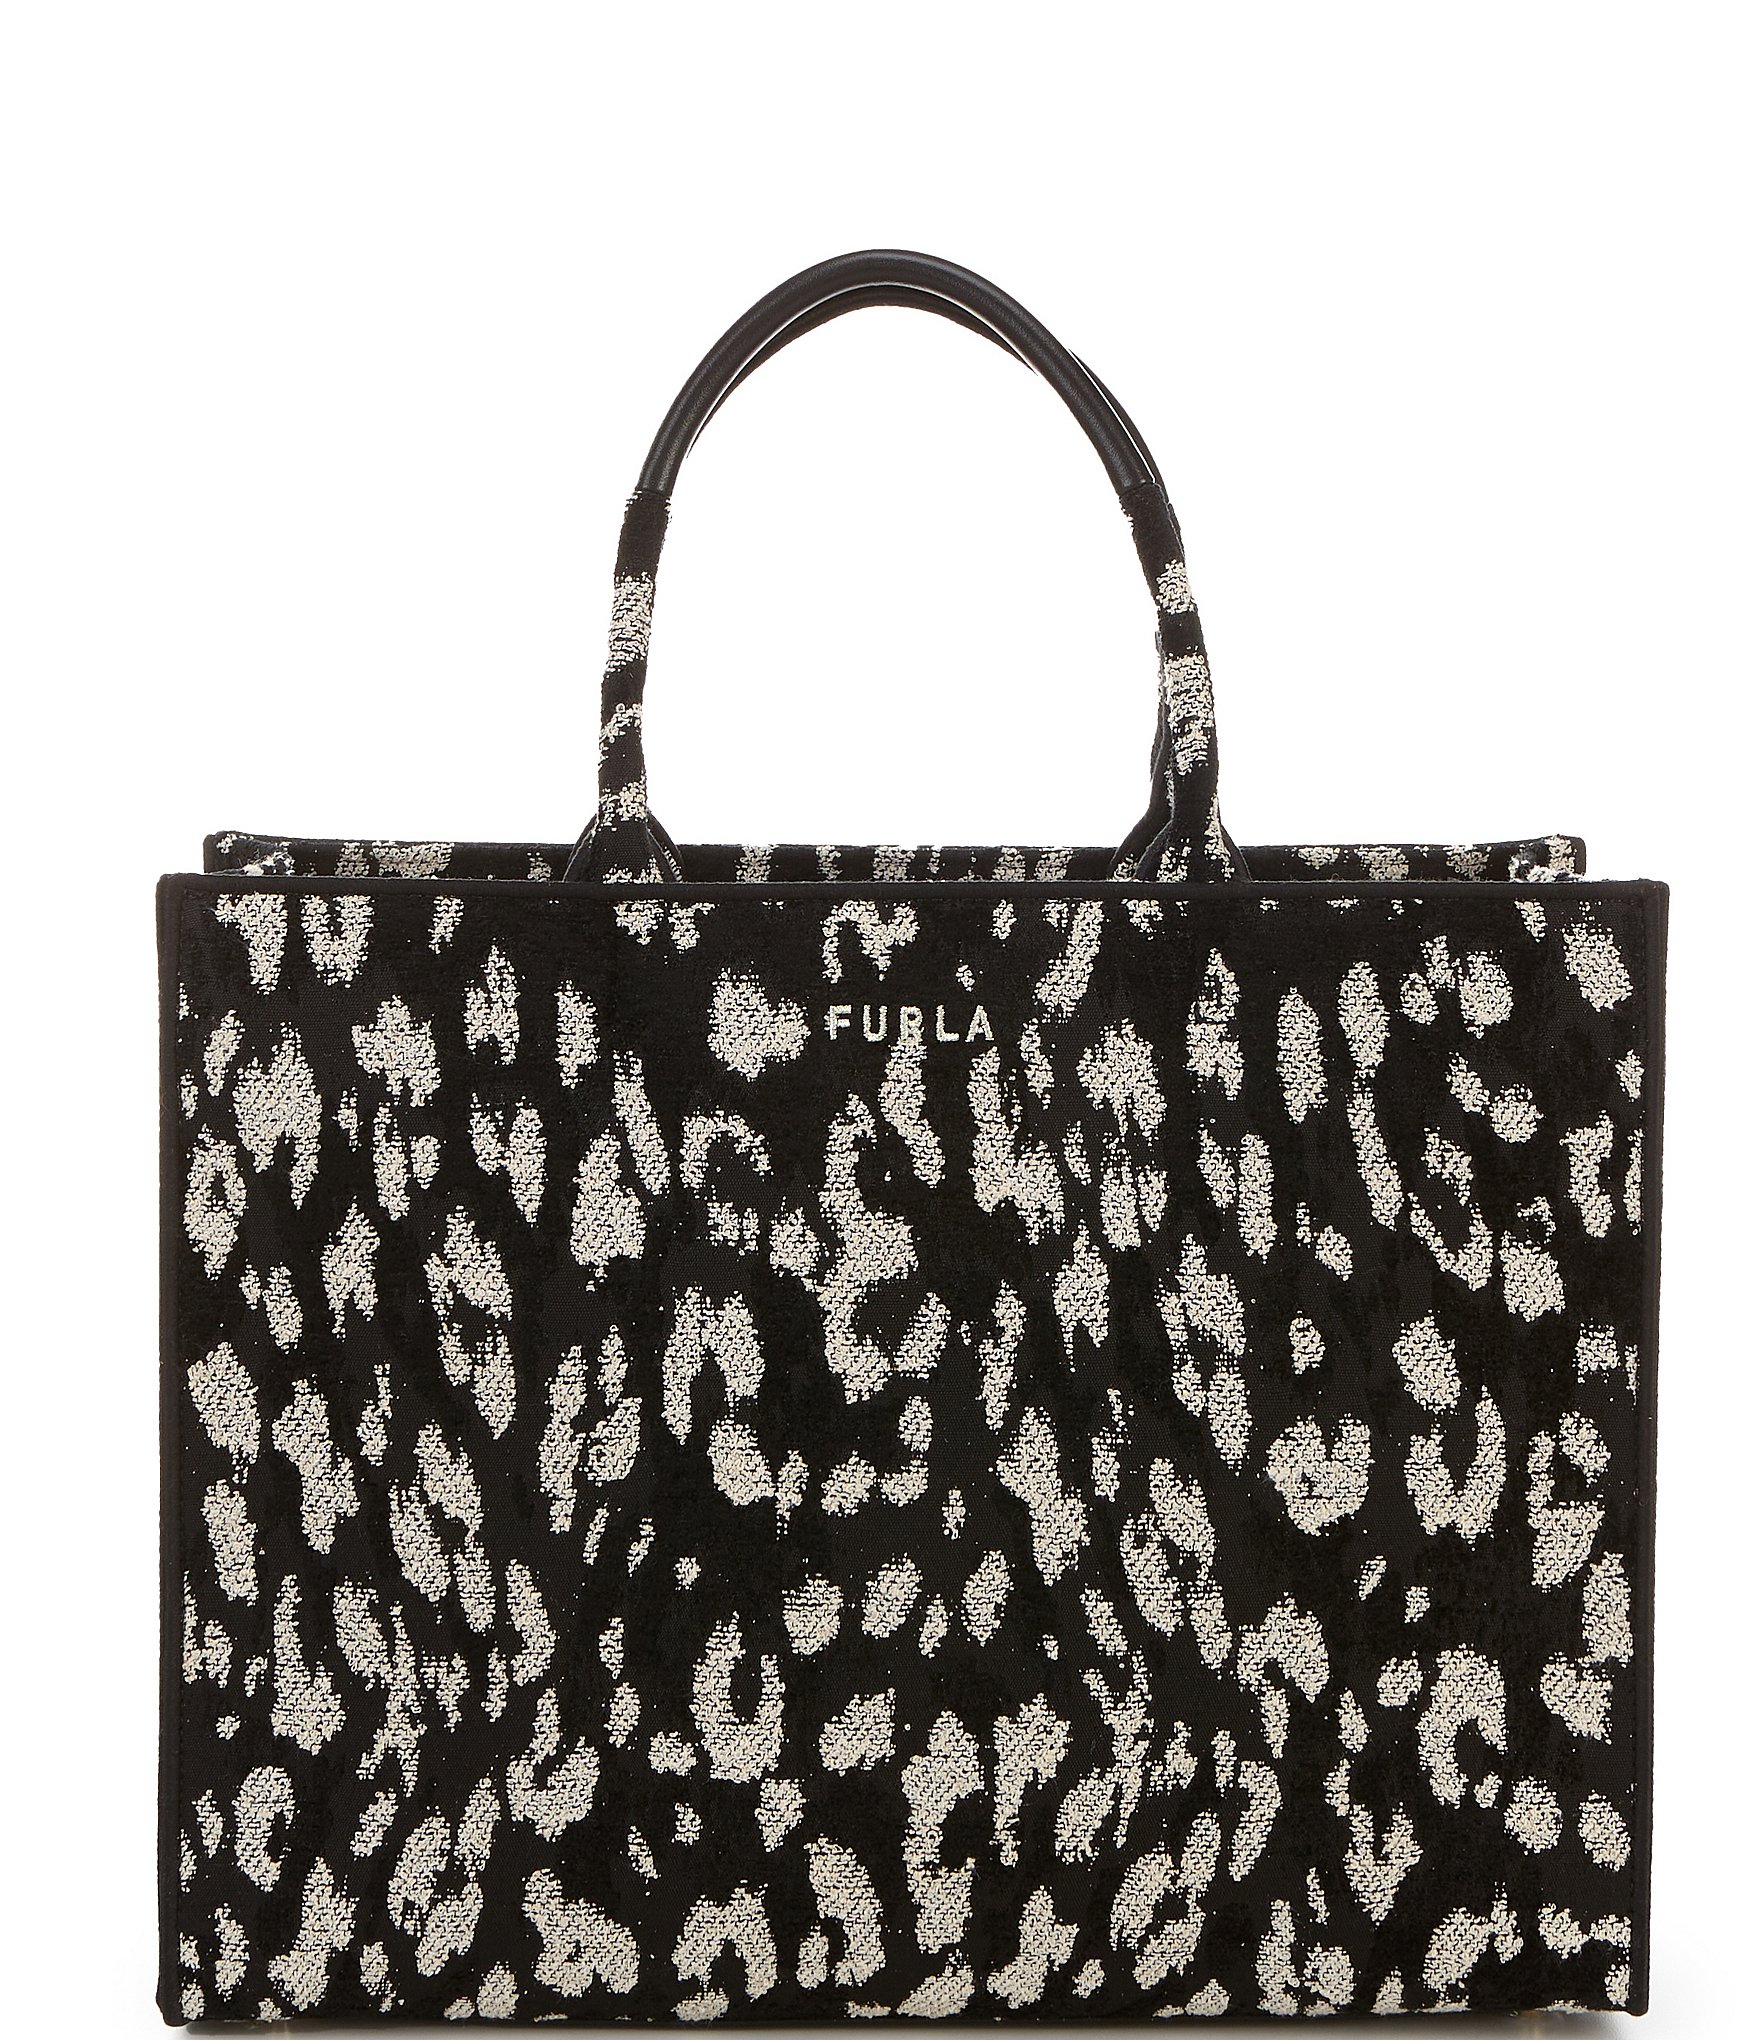 Furla Opportunity Tote small bag review 